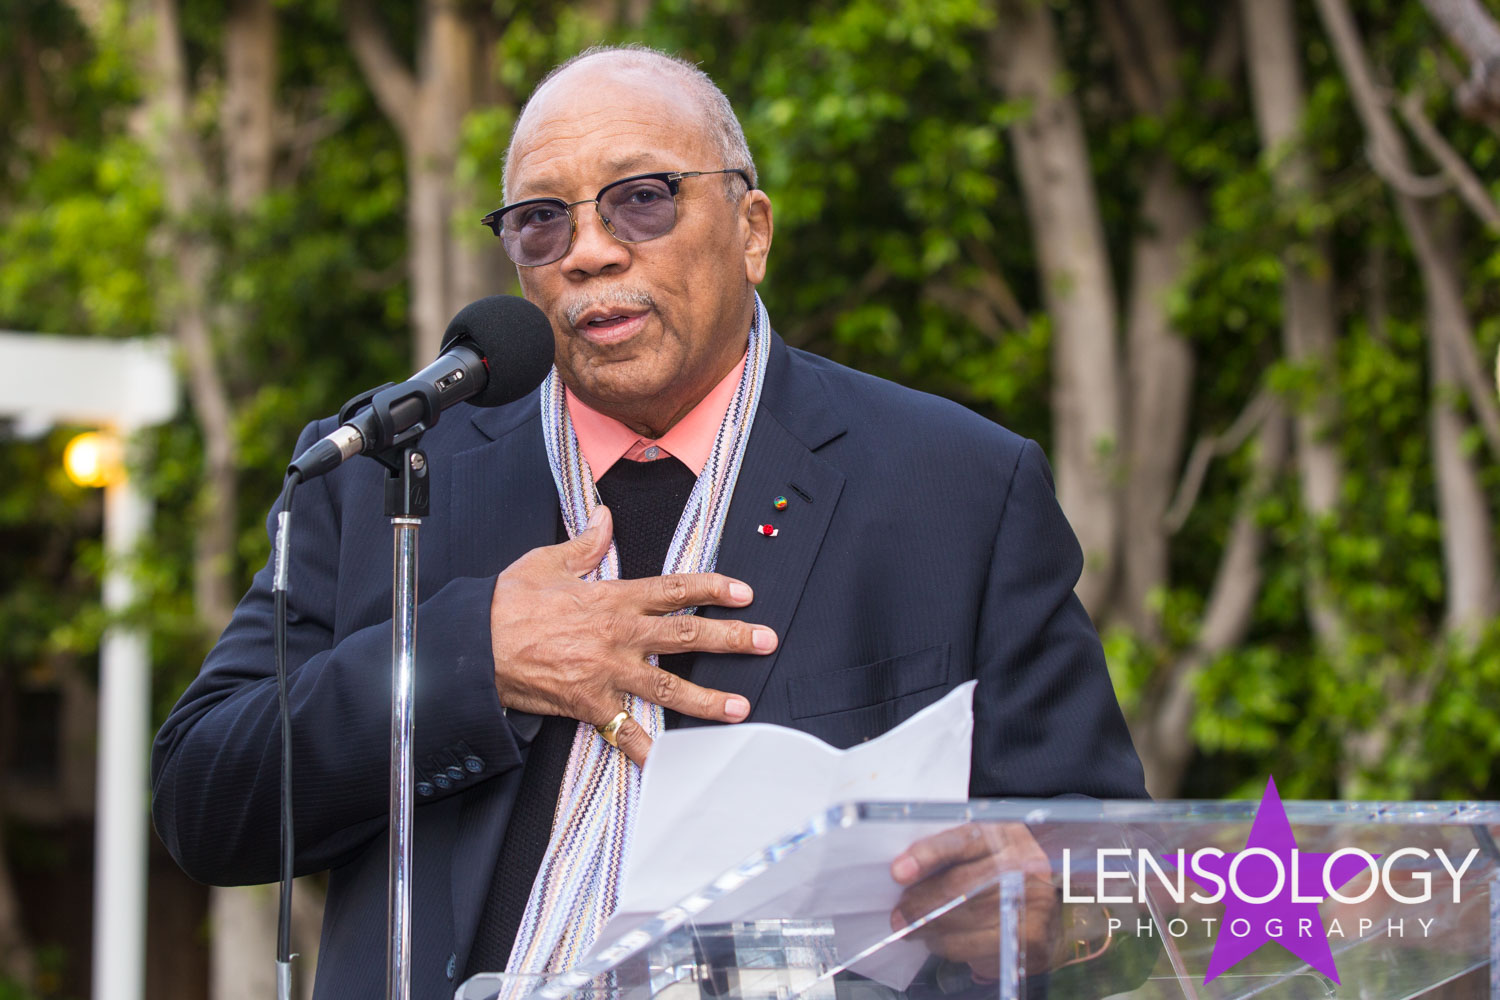 LENSOLOGY.NET - SACEM and The French Consul honors music veteran Quincy Jones with an award at the Résidence de France in Beverly Hills, CA.
All images are copyright of Lensology.net
Email: info@lensology.net
www.lensology.net